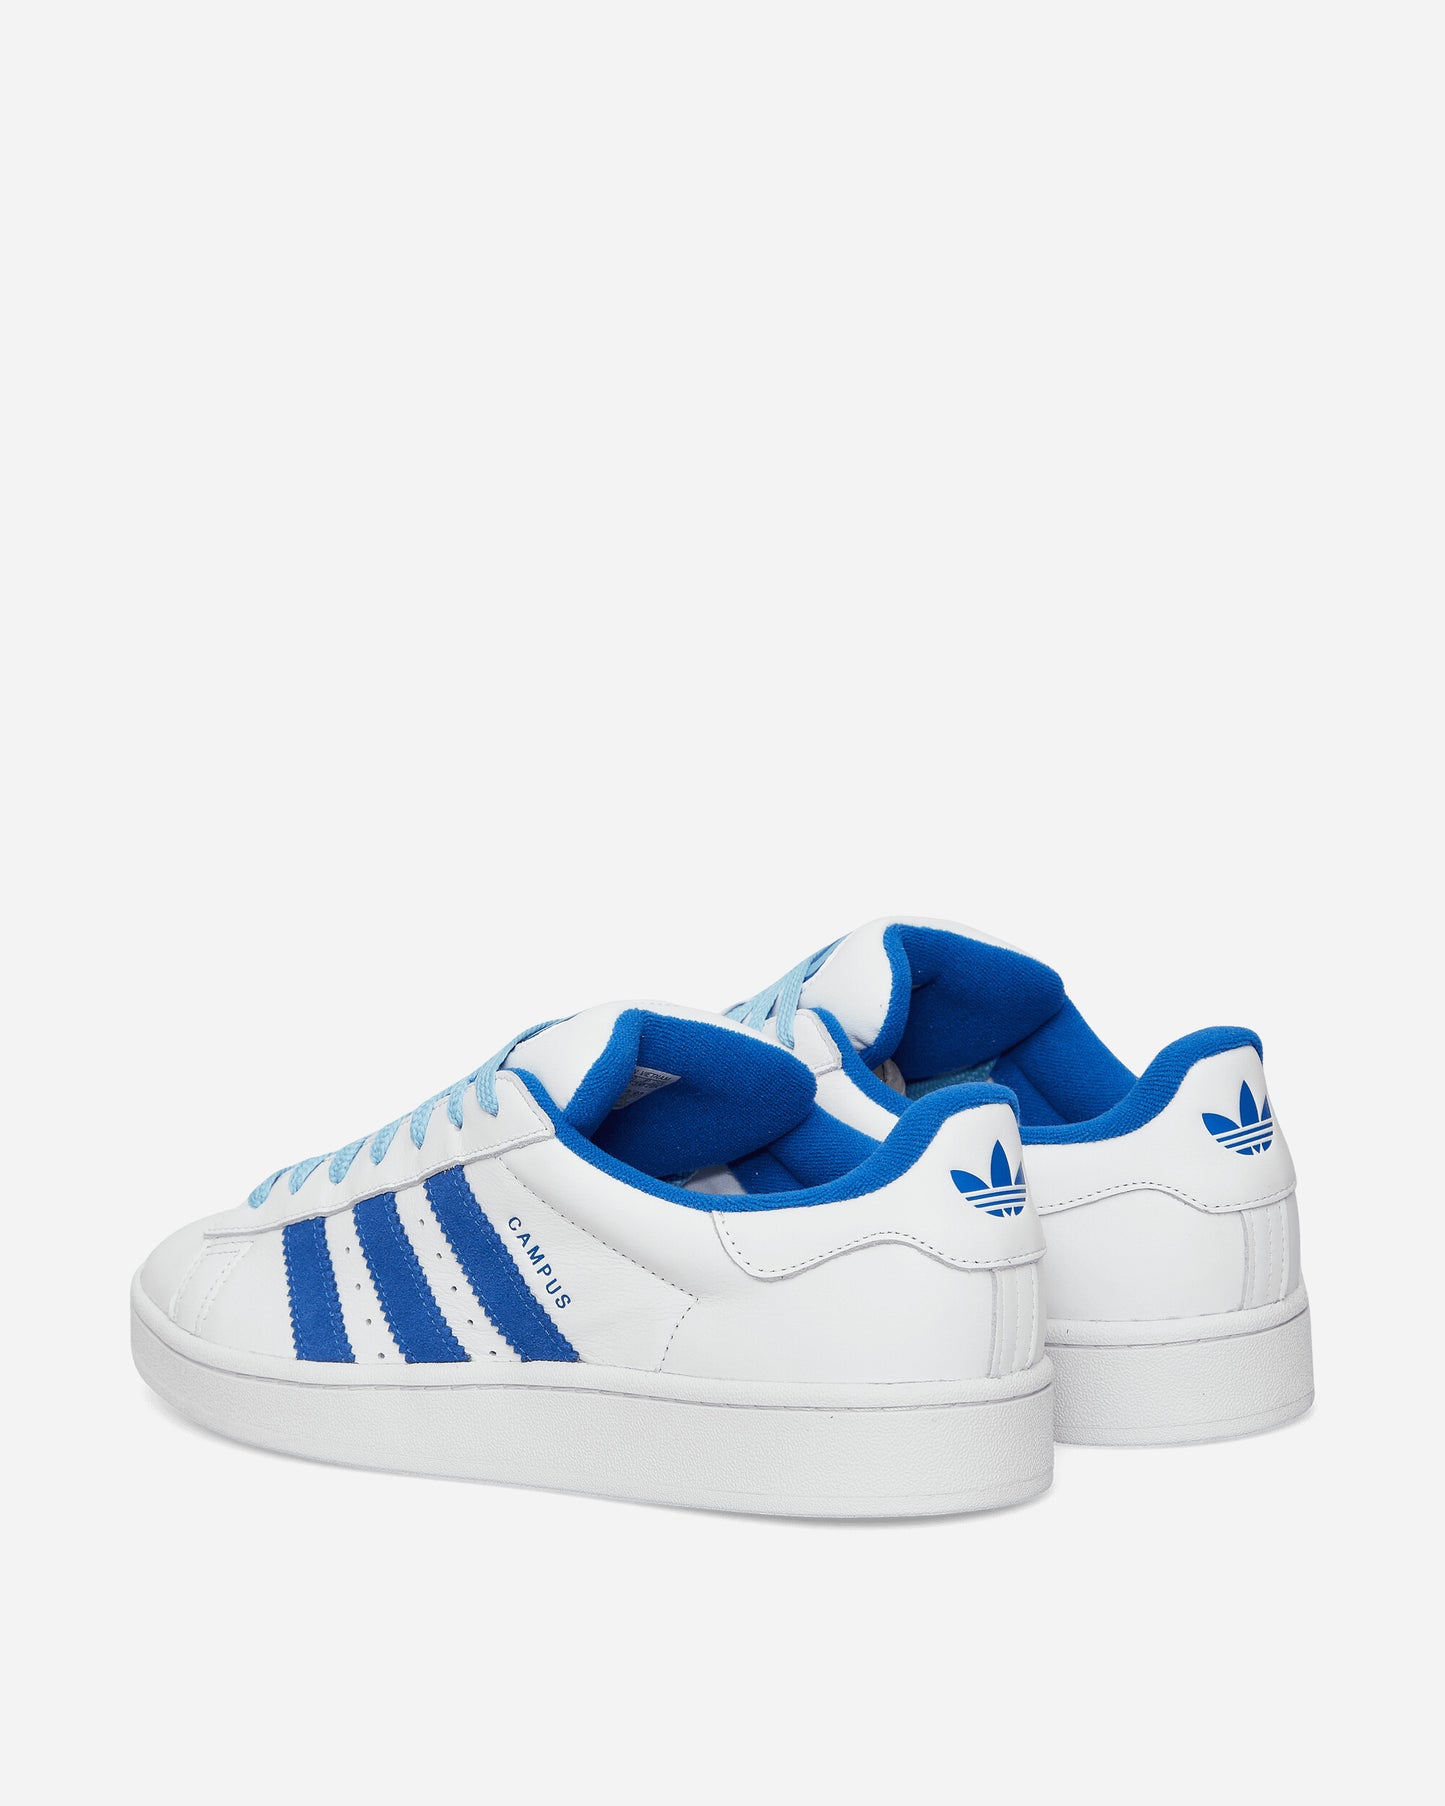 adidas Campus 00s Ftwwht/Blue Sneakers Low ID2066 001